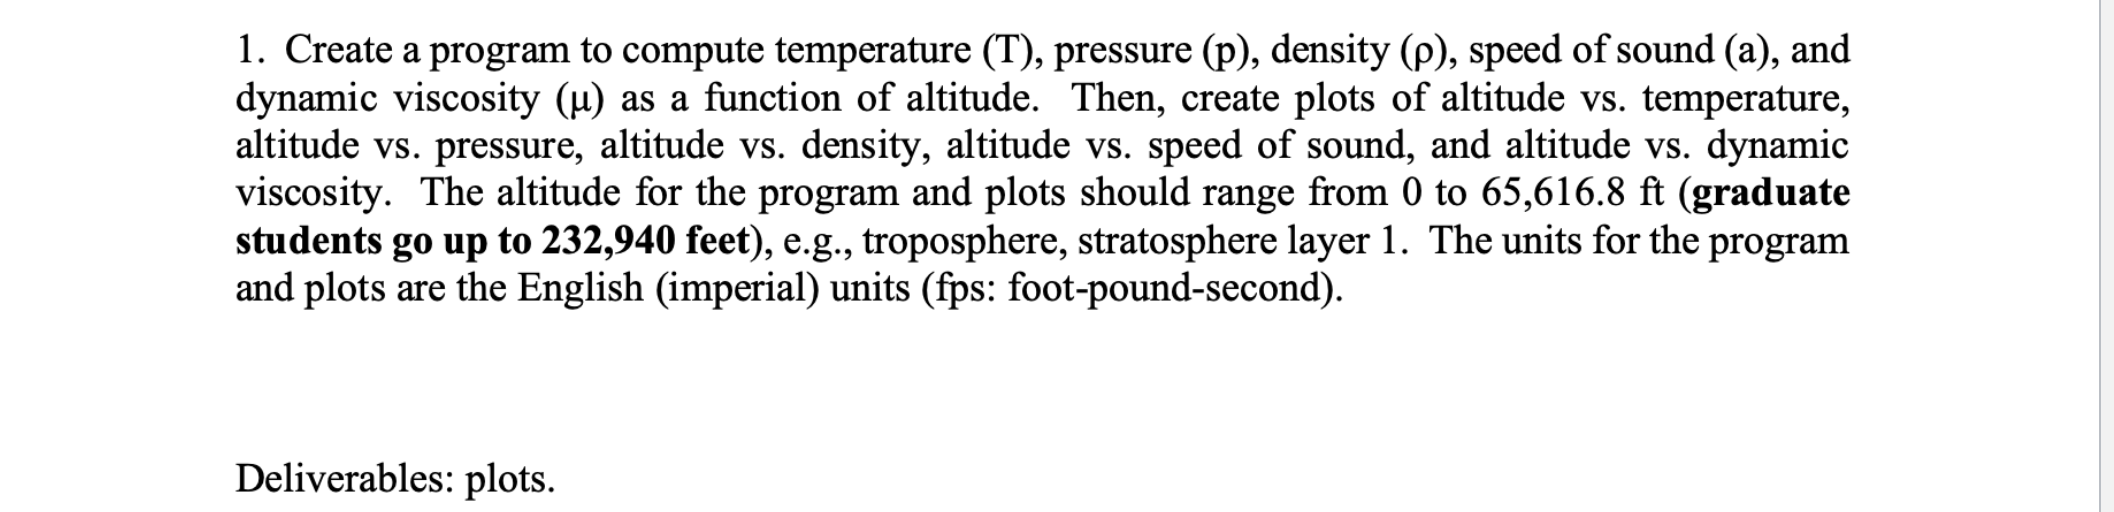 1. Create a program to compute temperature (T), pressure (p), density (p), speed of sound (a), and dynamic